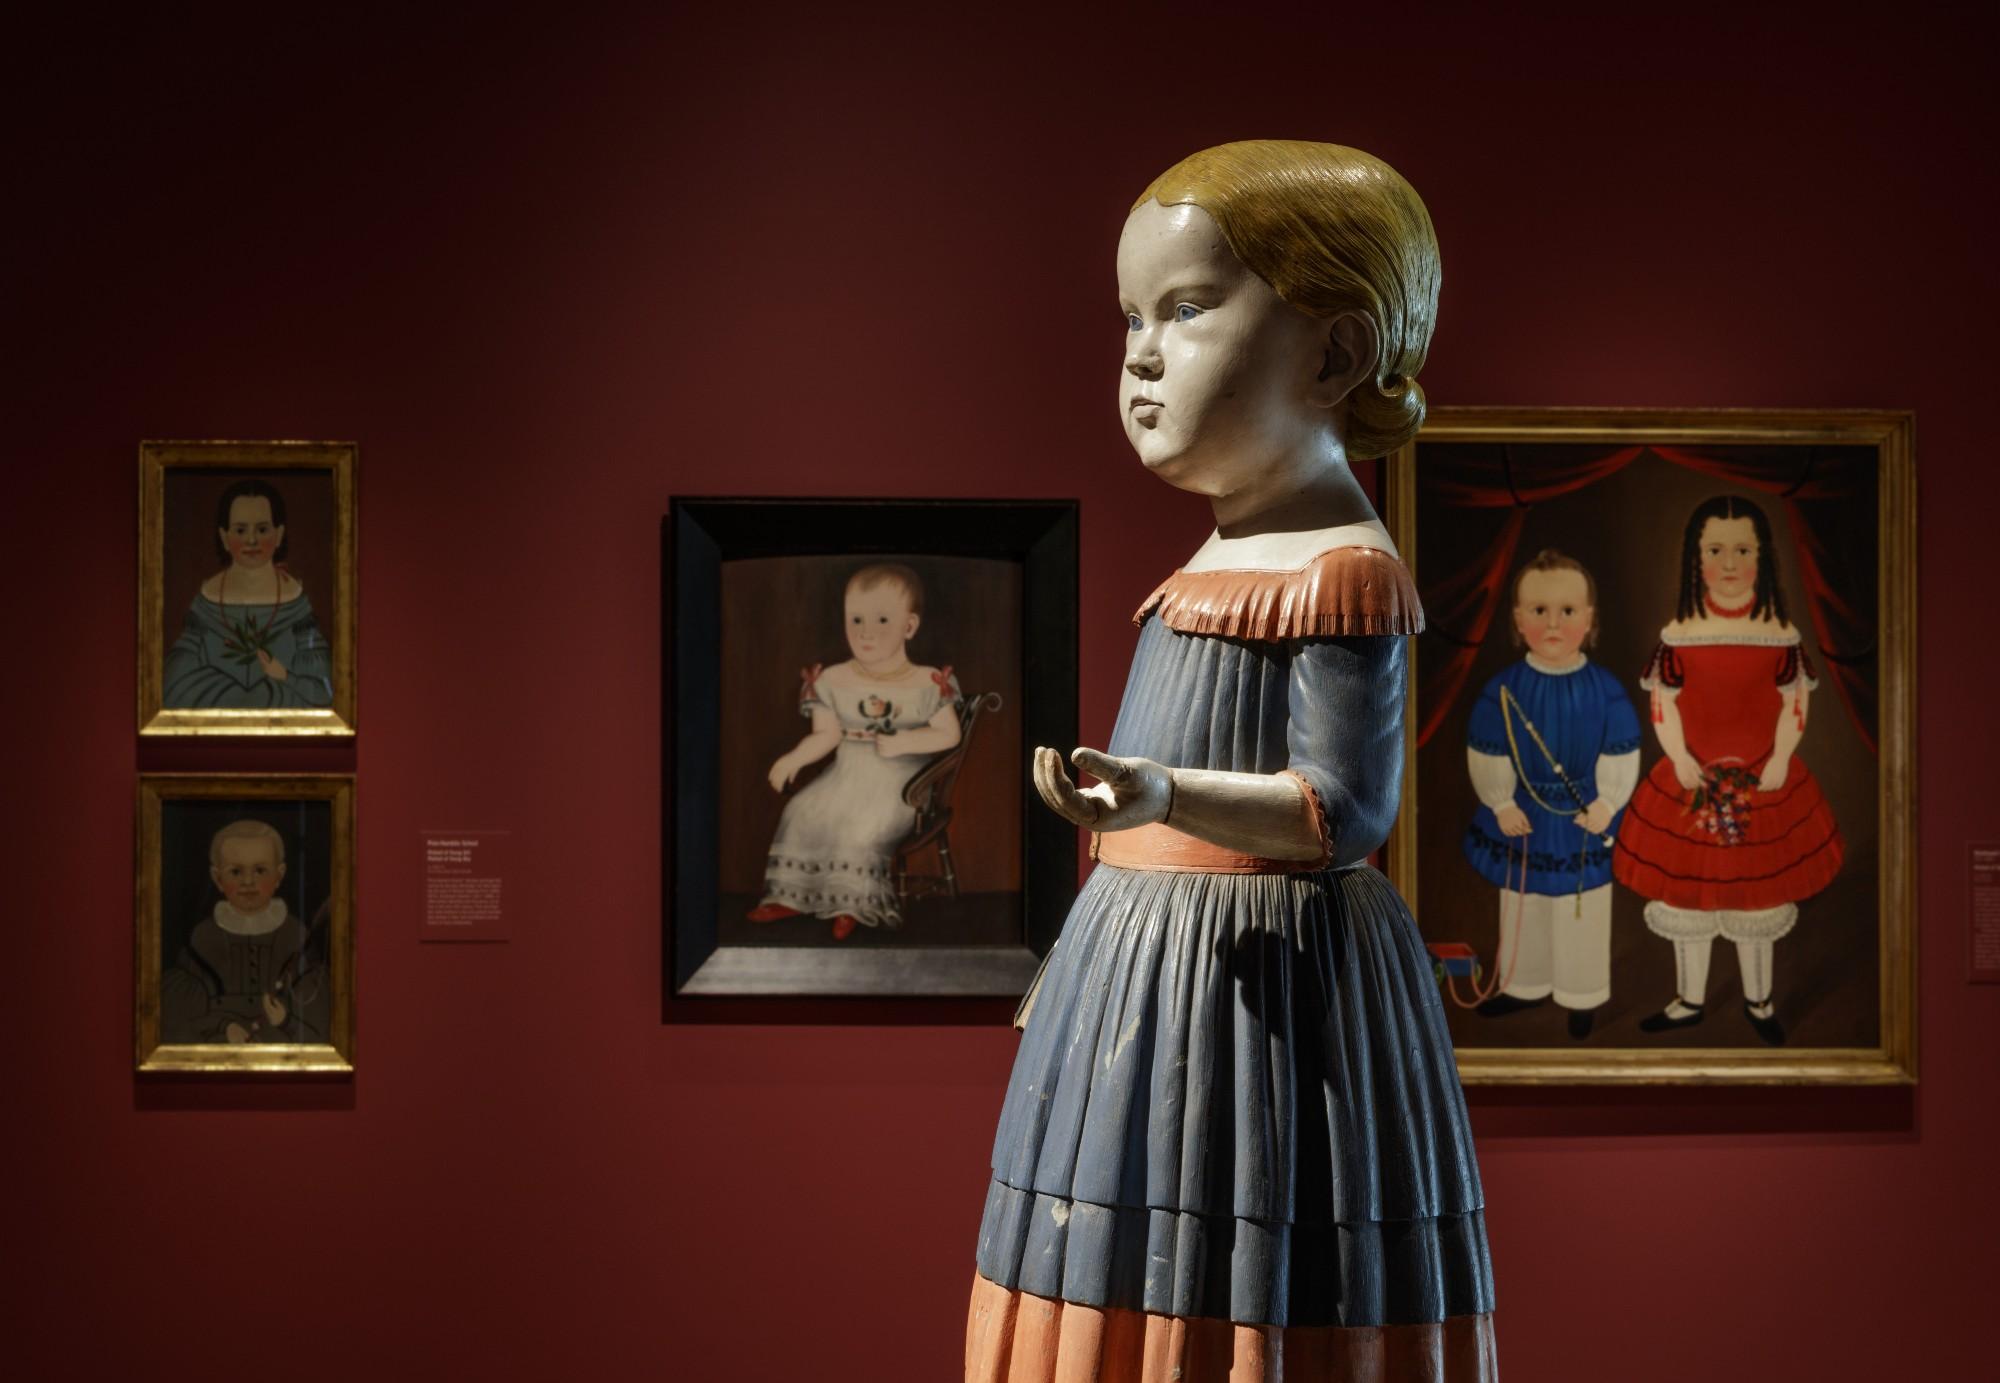 art gallery with sculpture of a child and portraits of children